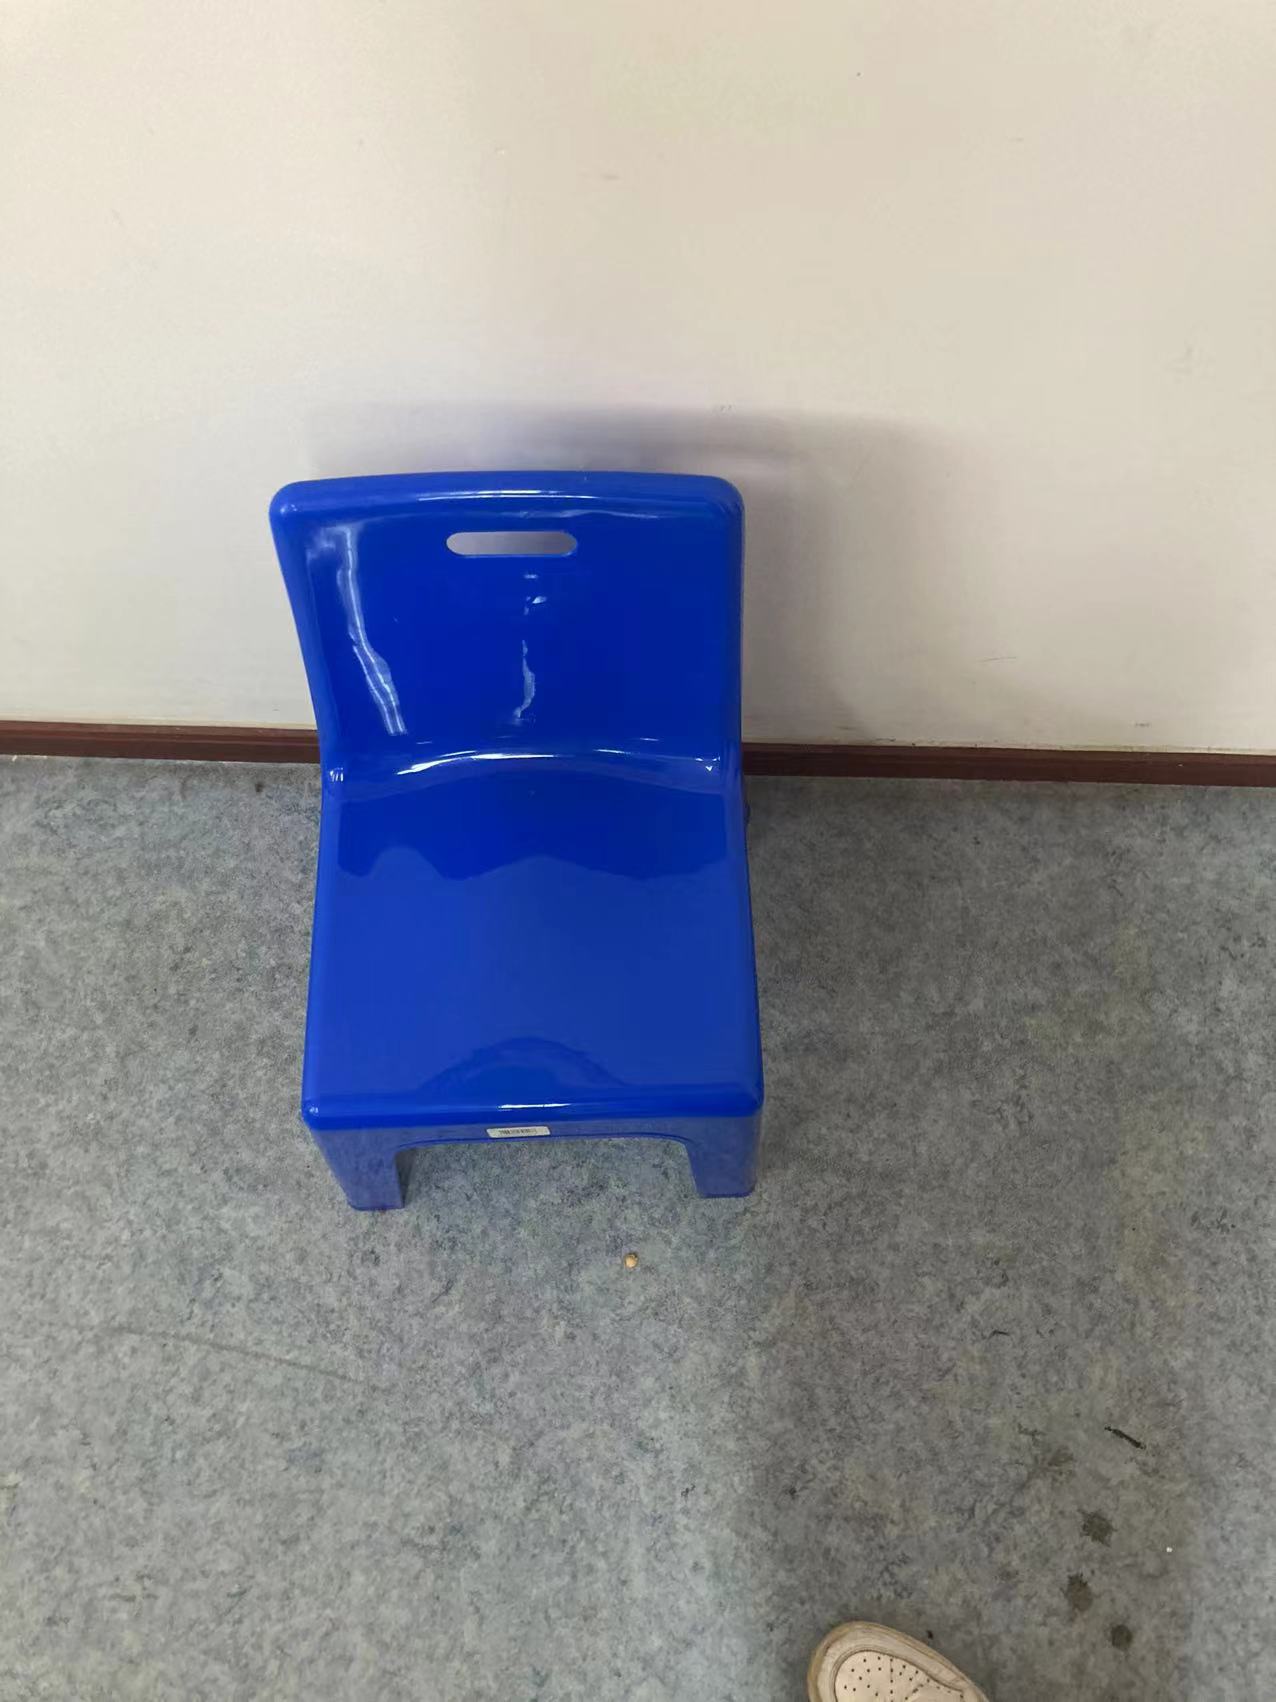 Plastic Chairs For Events Mould Injection Moulding Machine